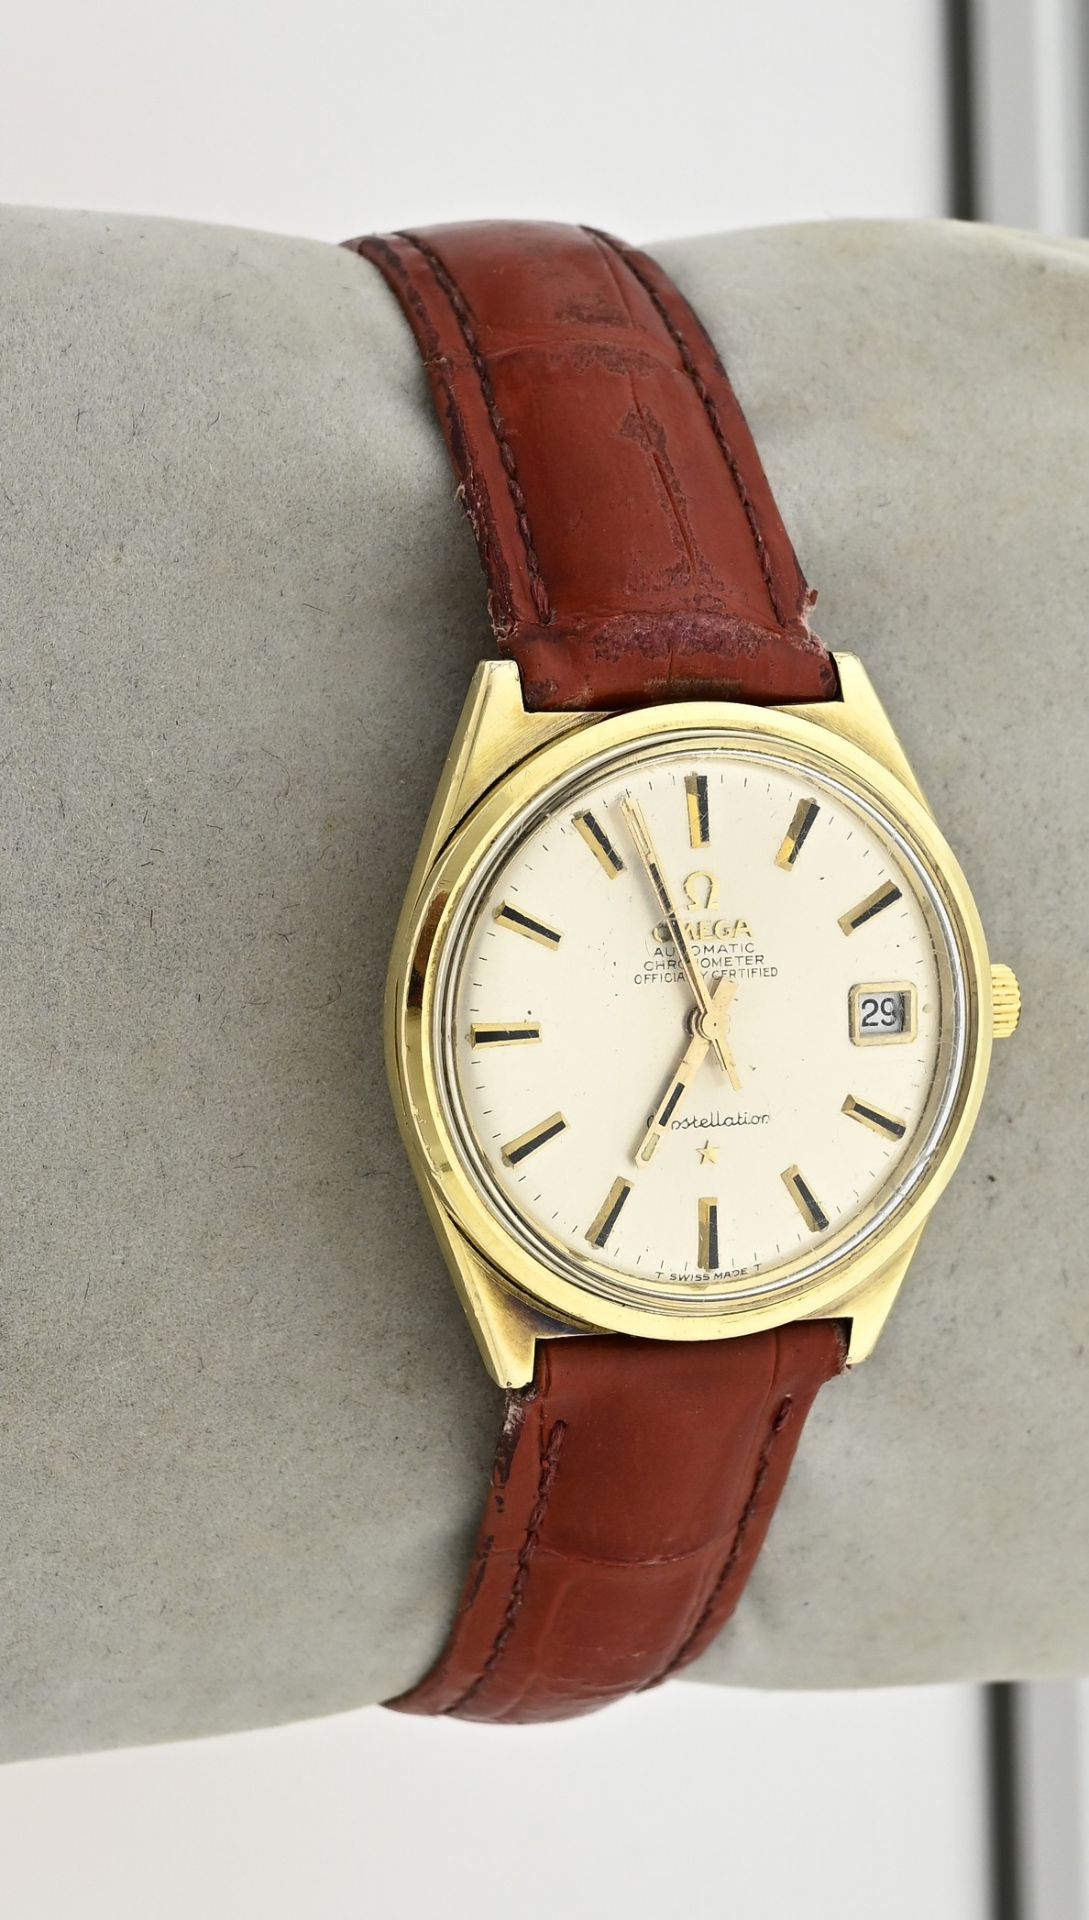 Watch Omega with leather strap